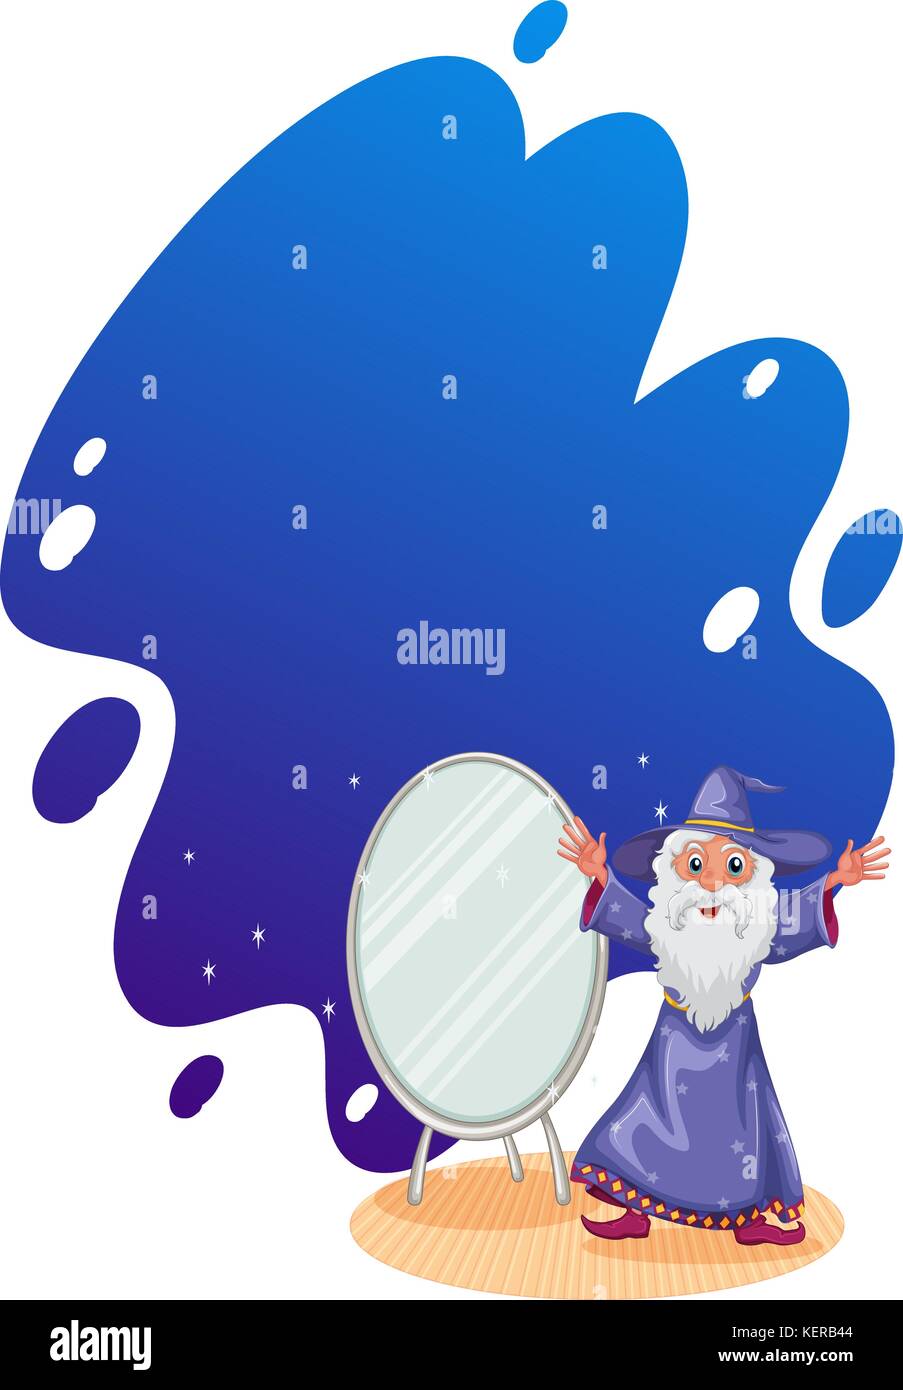 Illustration of a wizard beside the mirror on a white background Stock Vector